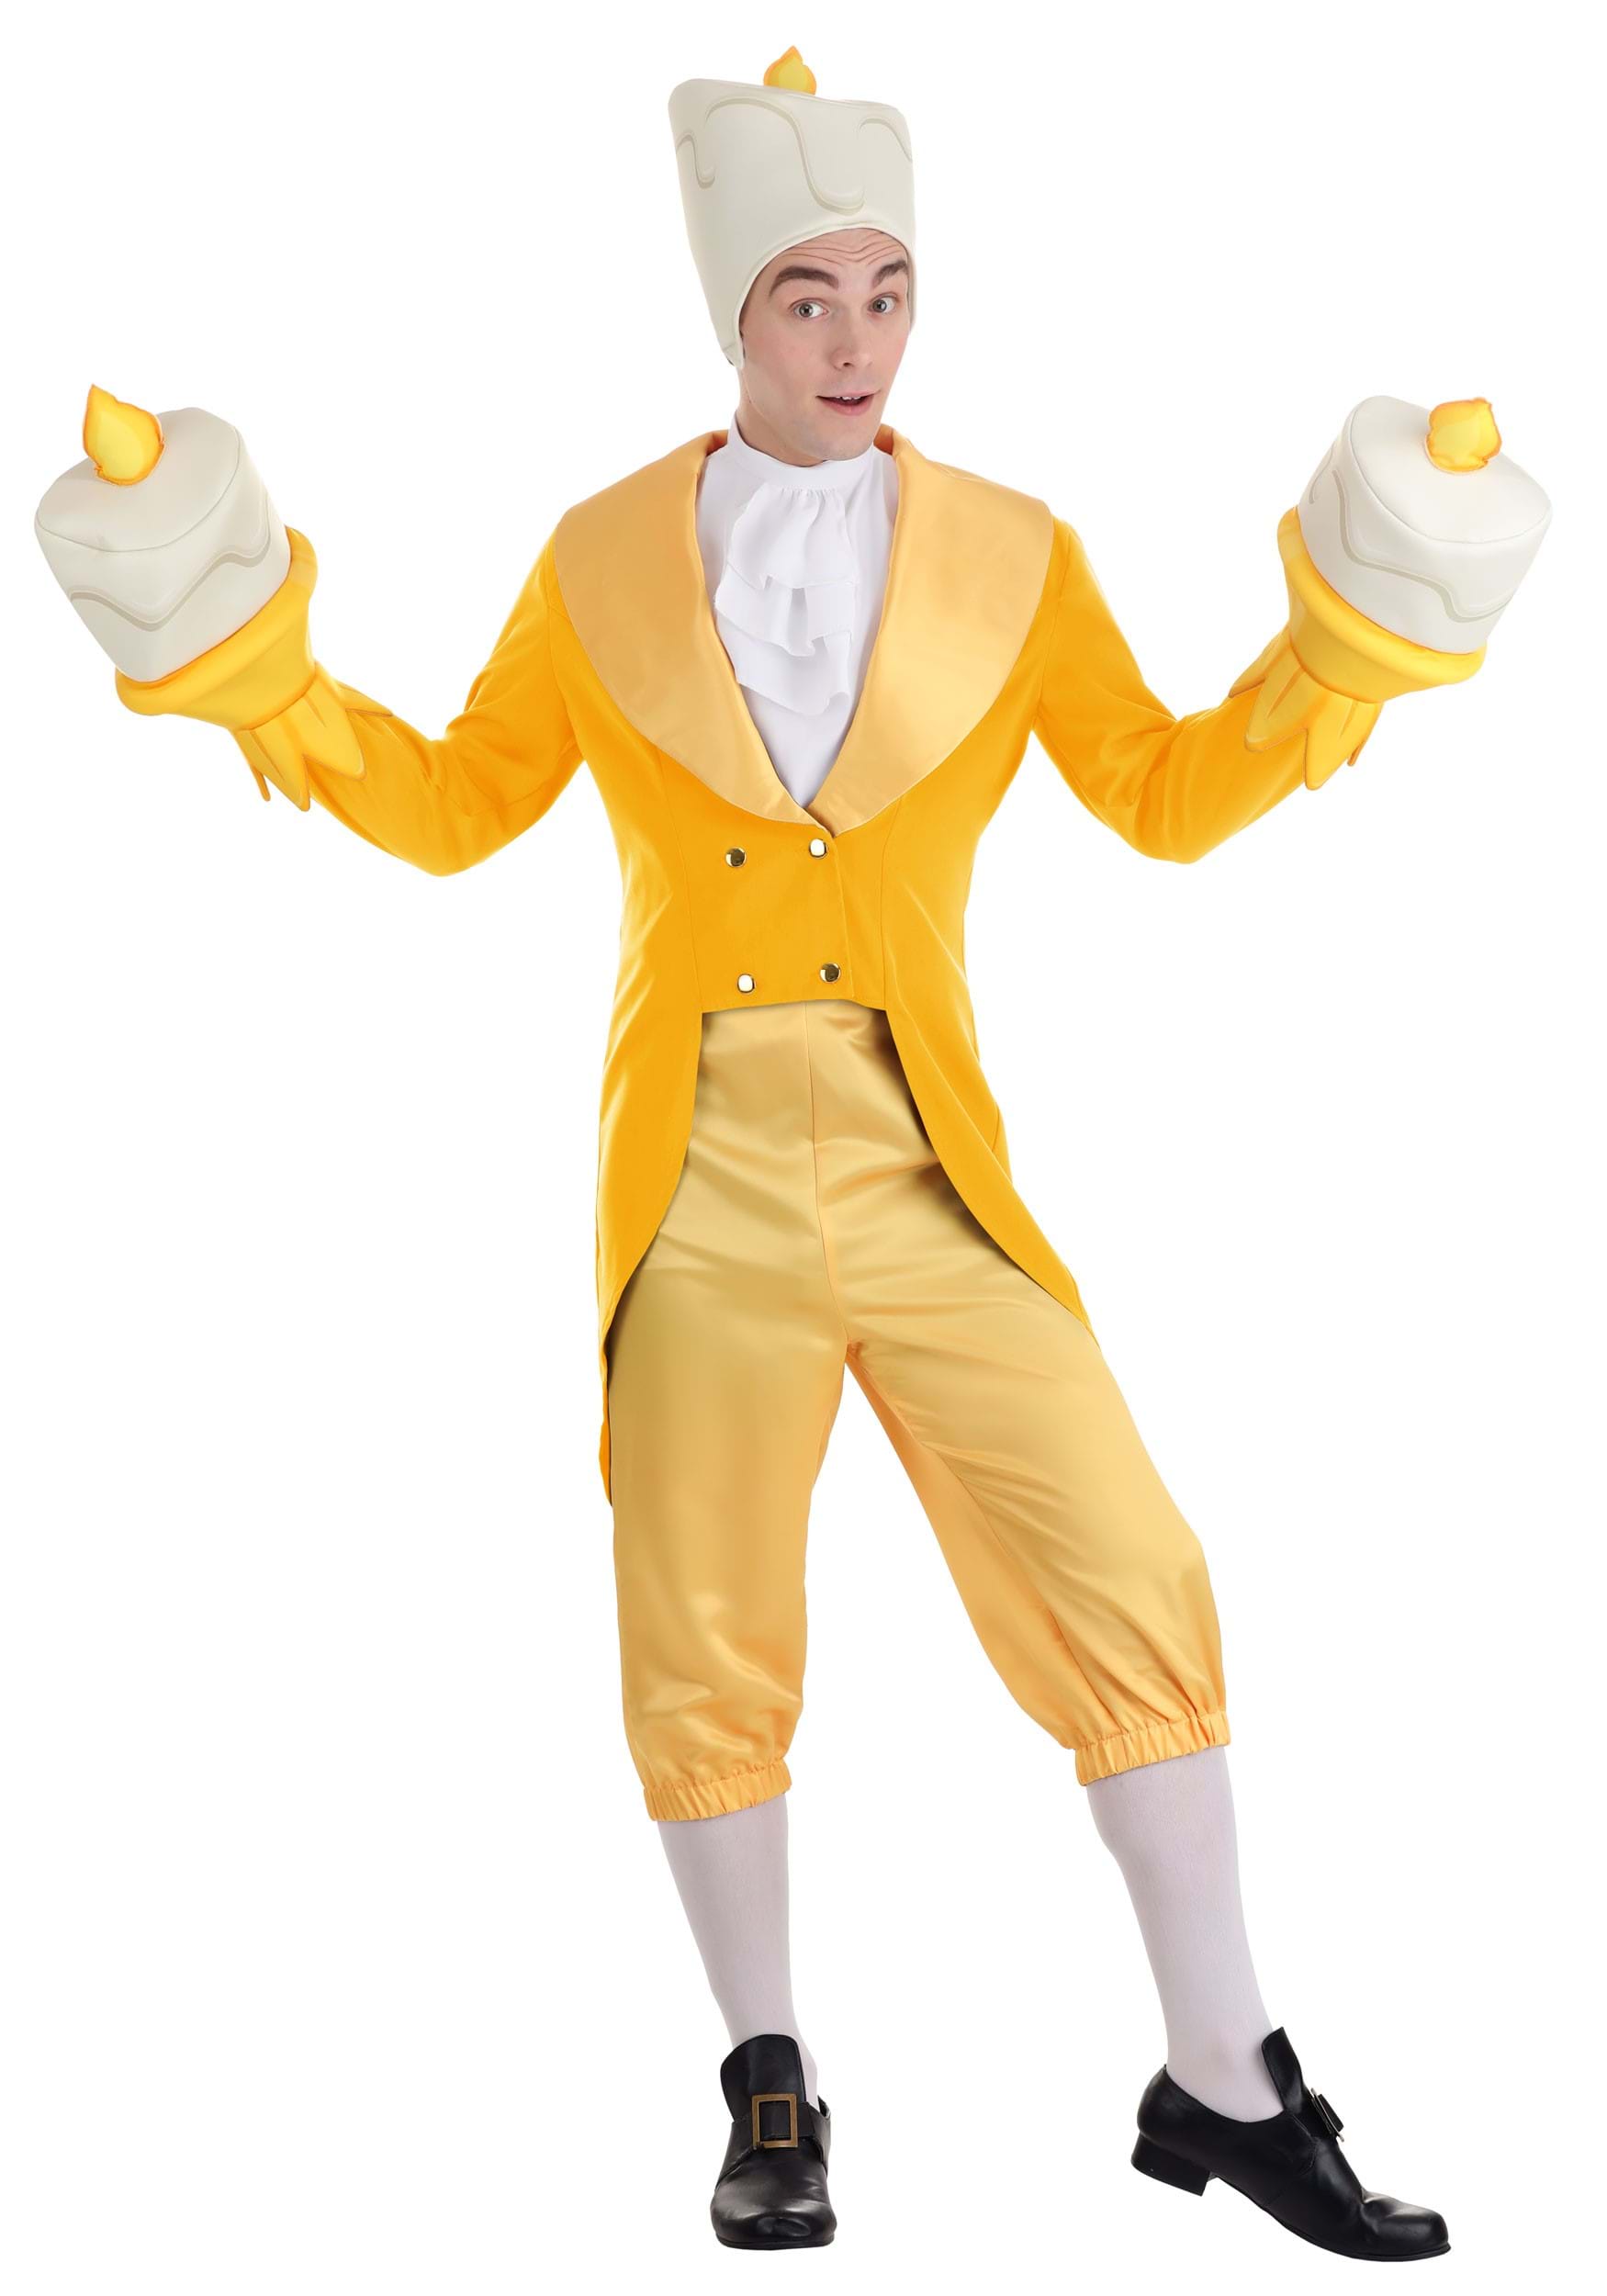 Photos - Fancy Dress A&D FUN Costumes Adult Beauty and the Beast Lumiere Costume Orange/White&# 